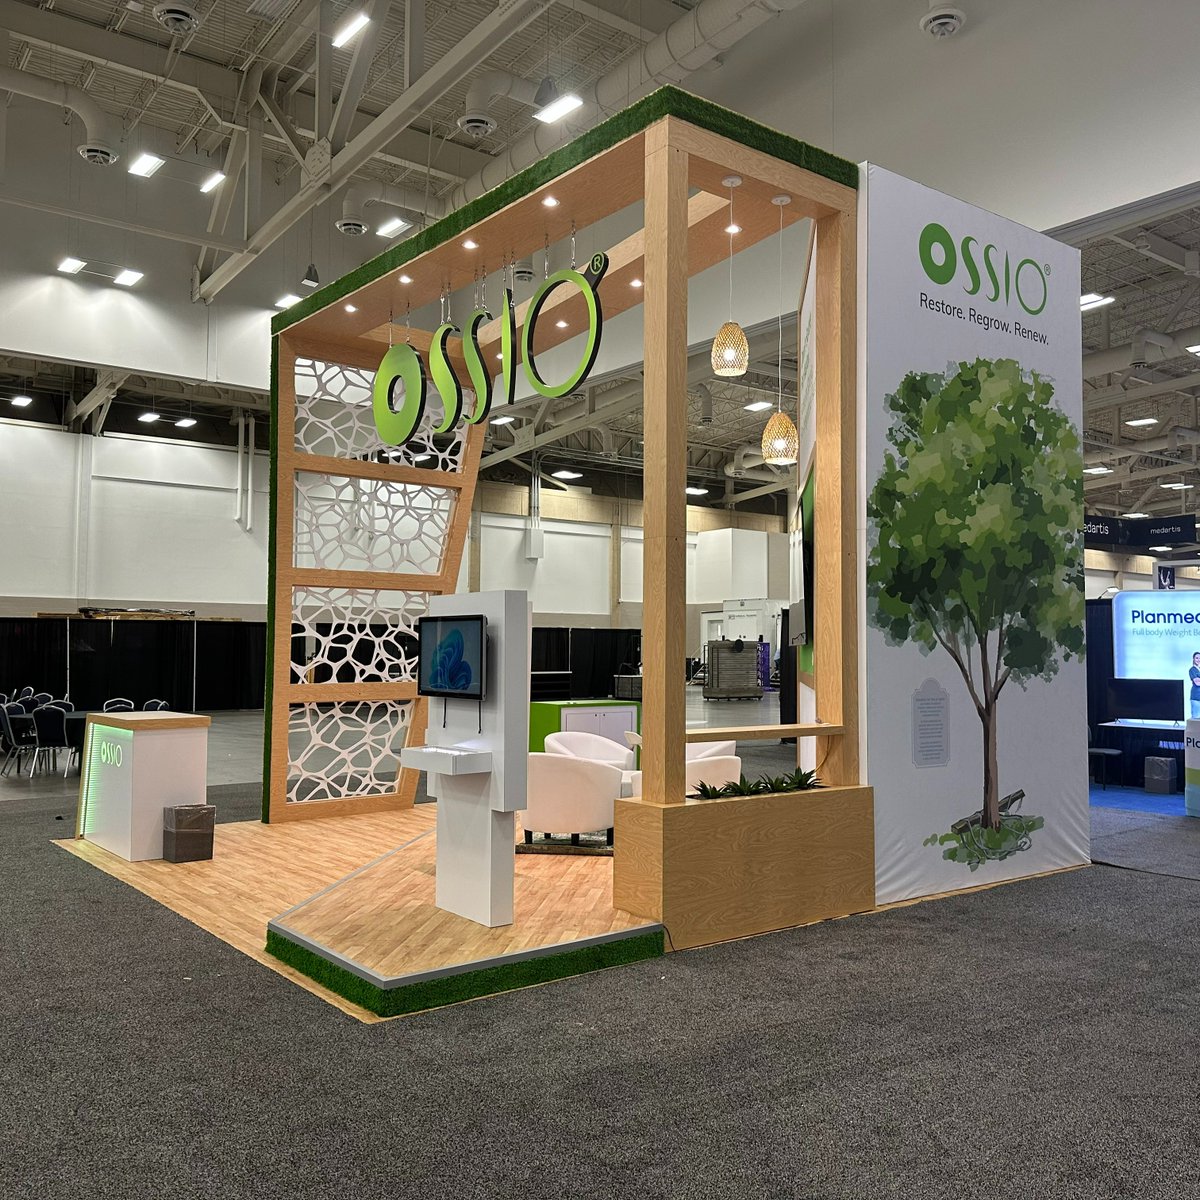 The secret to successful trade show booths? It's all in the details. Let's craft an exceptional experience for your brand!

#TradeShowSuccess #DetailsMatter #TradeShowPartner #ExperientalMarketing #BoothRental #BoothBuild #CustomFabrication #CreativeAgency